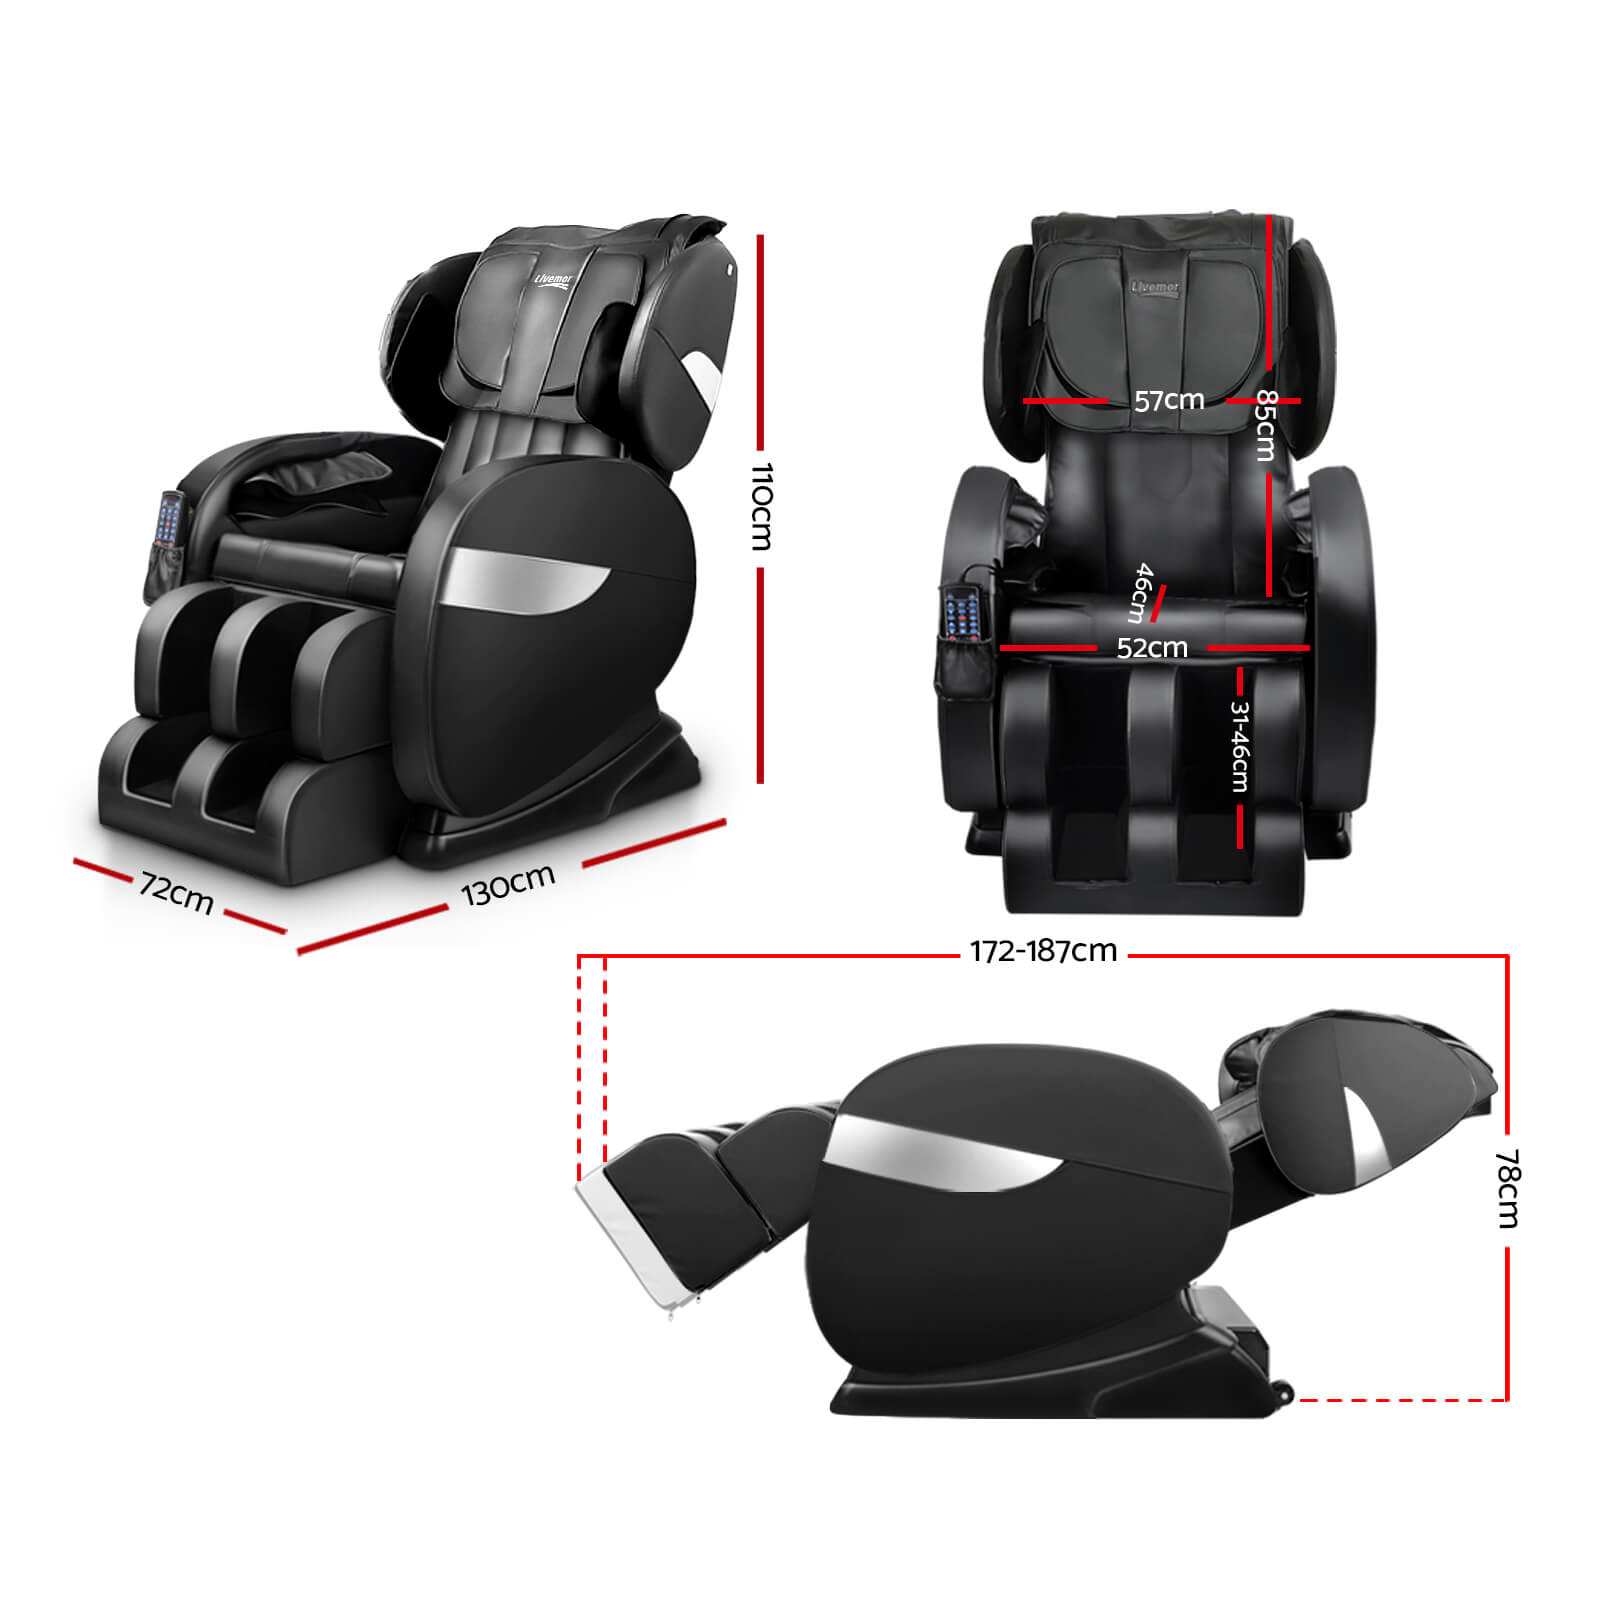 Black Electric Massage Chair Livemor Delmue Recliner Massager - Full Auto Extension, Zero-Gravity Massage. Remote Control Included Sizes and Dimensions